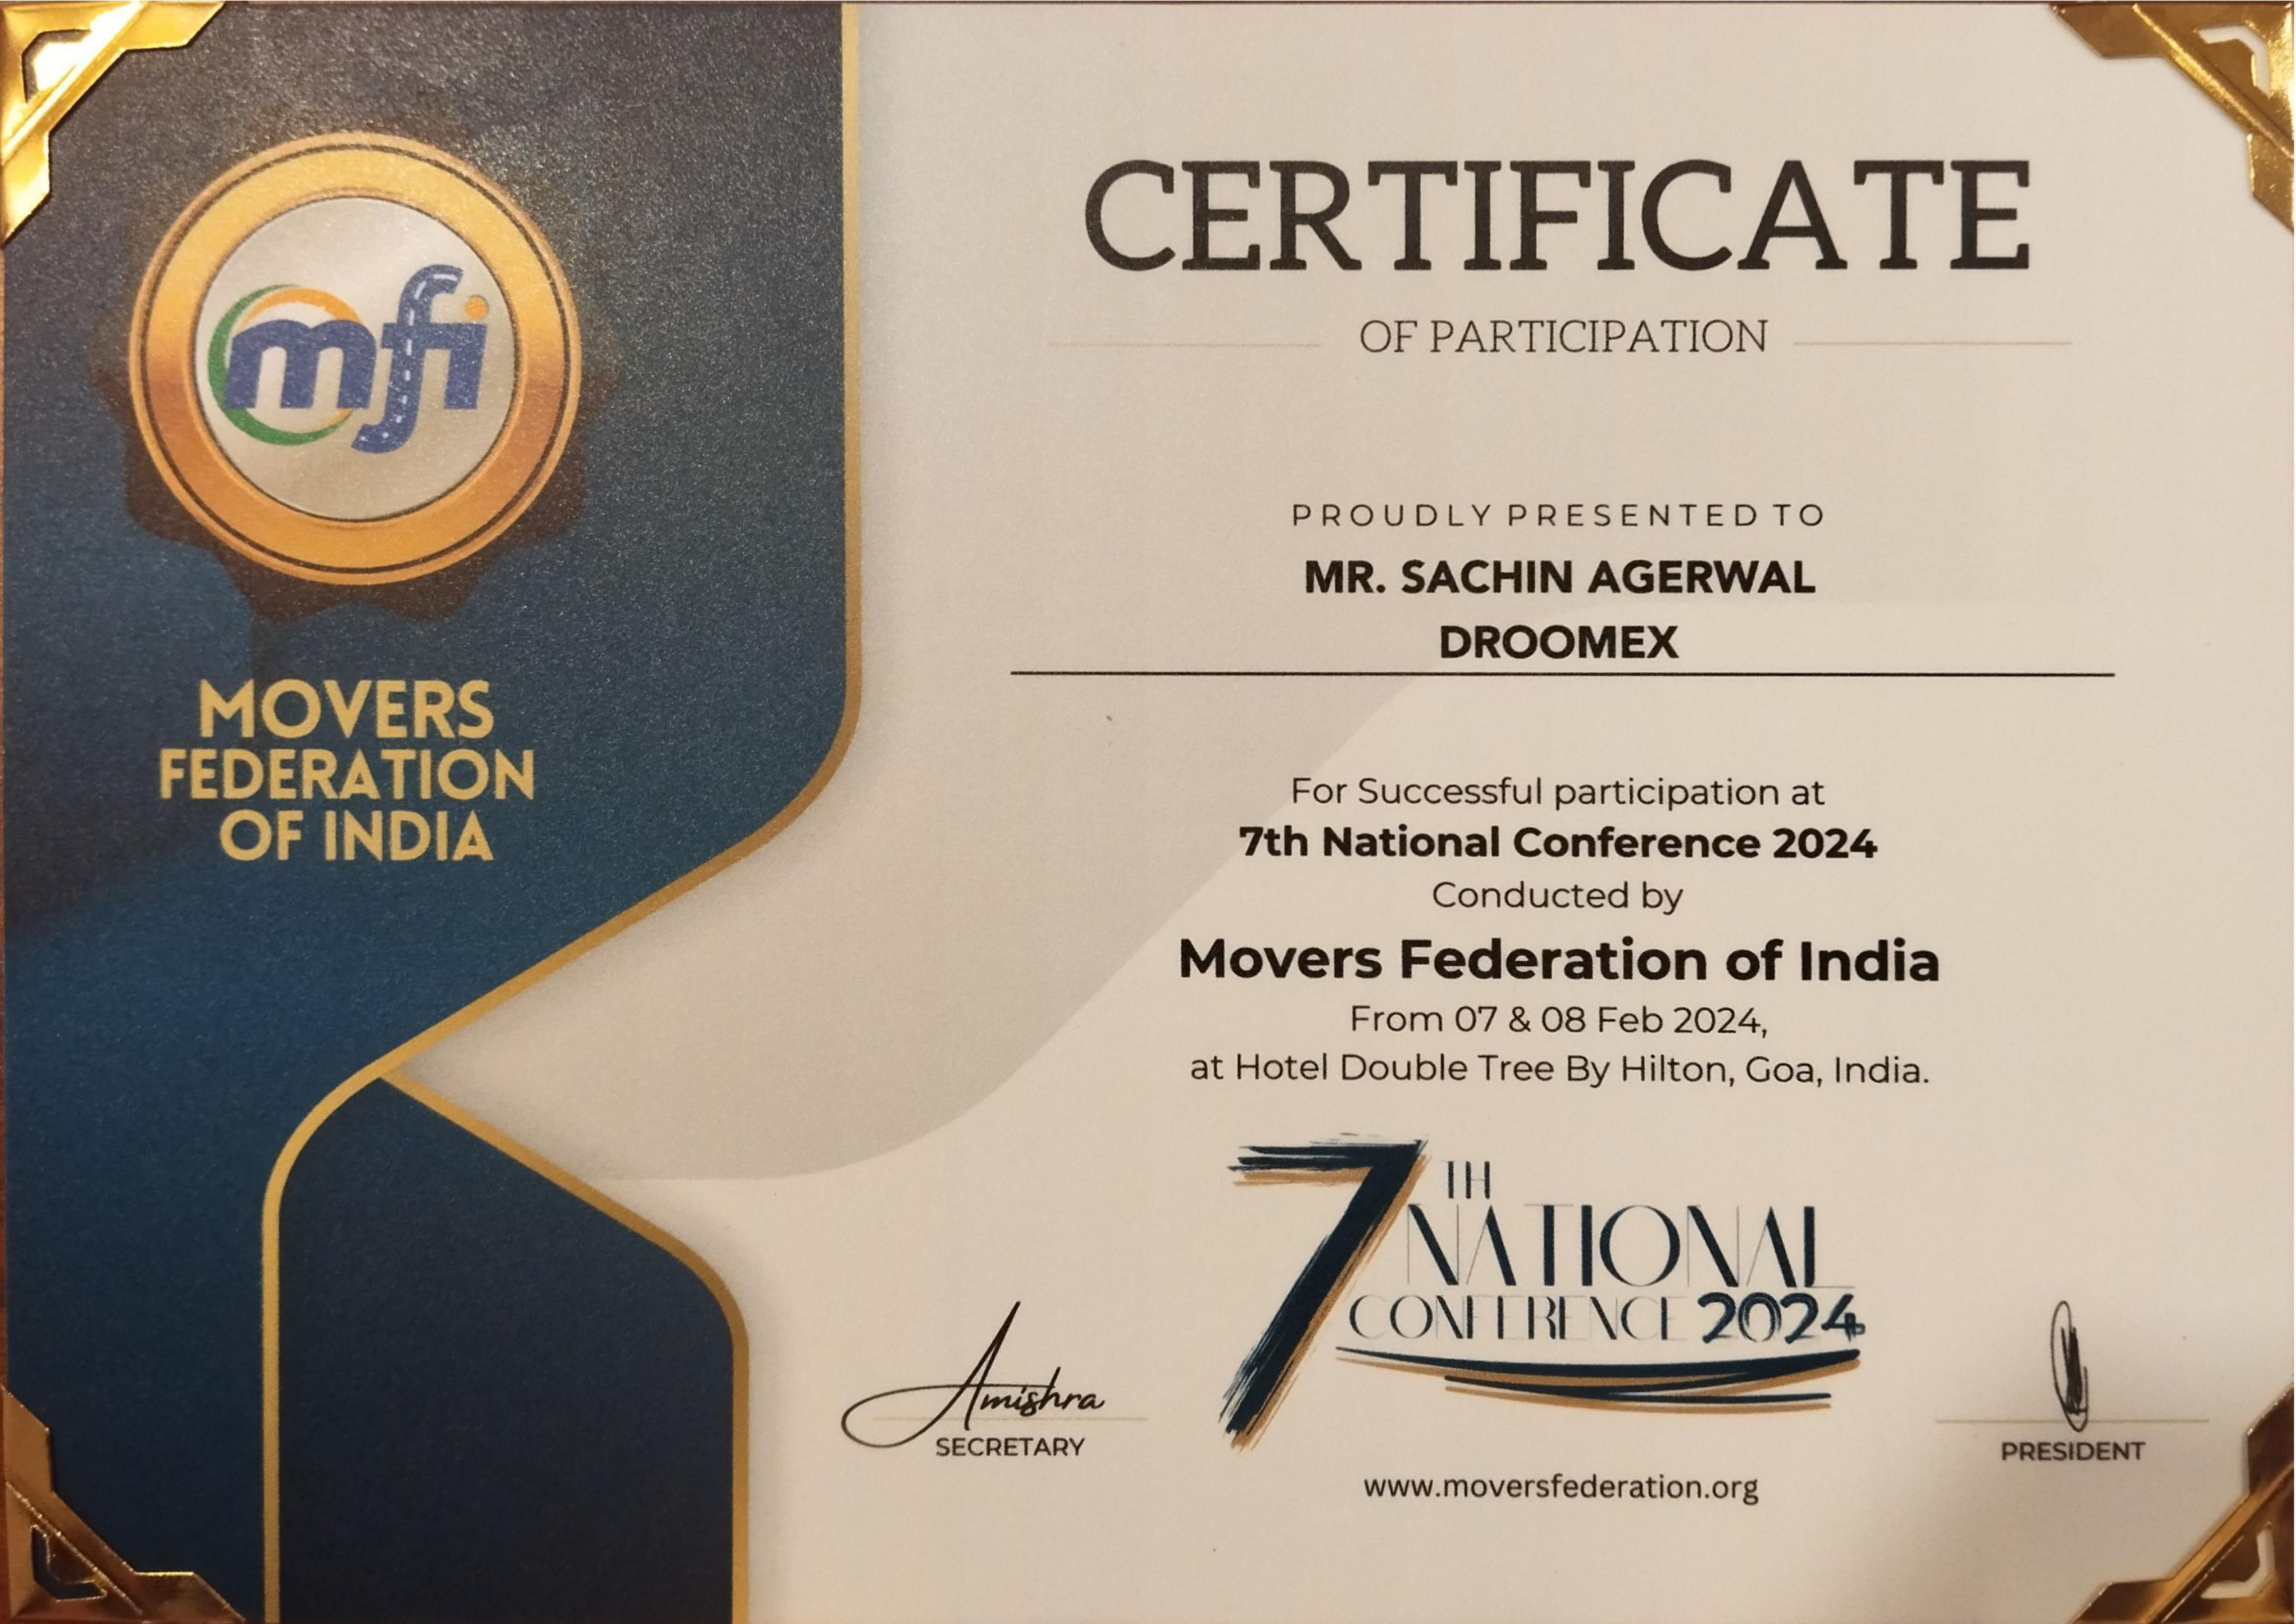 MFI (Movers Federation of India) Certificate